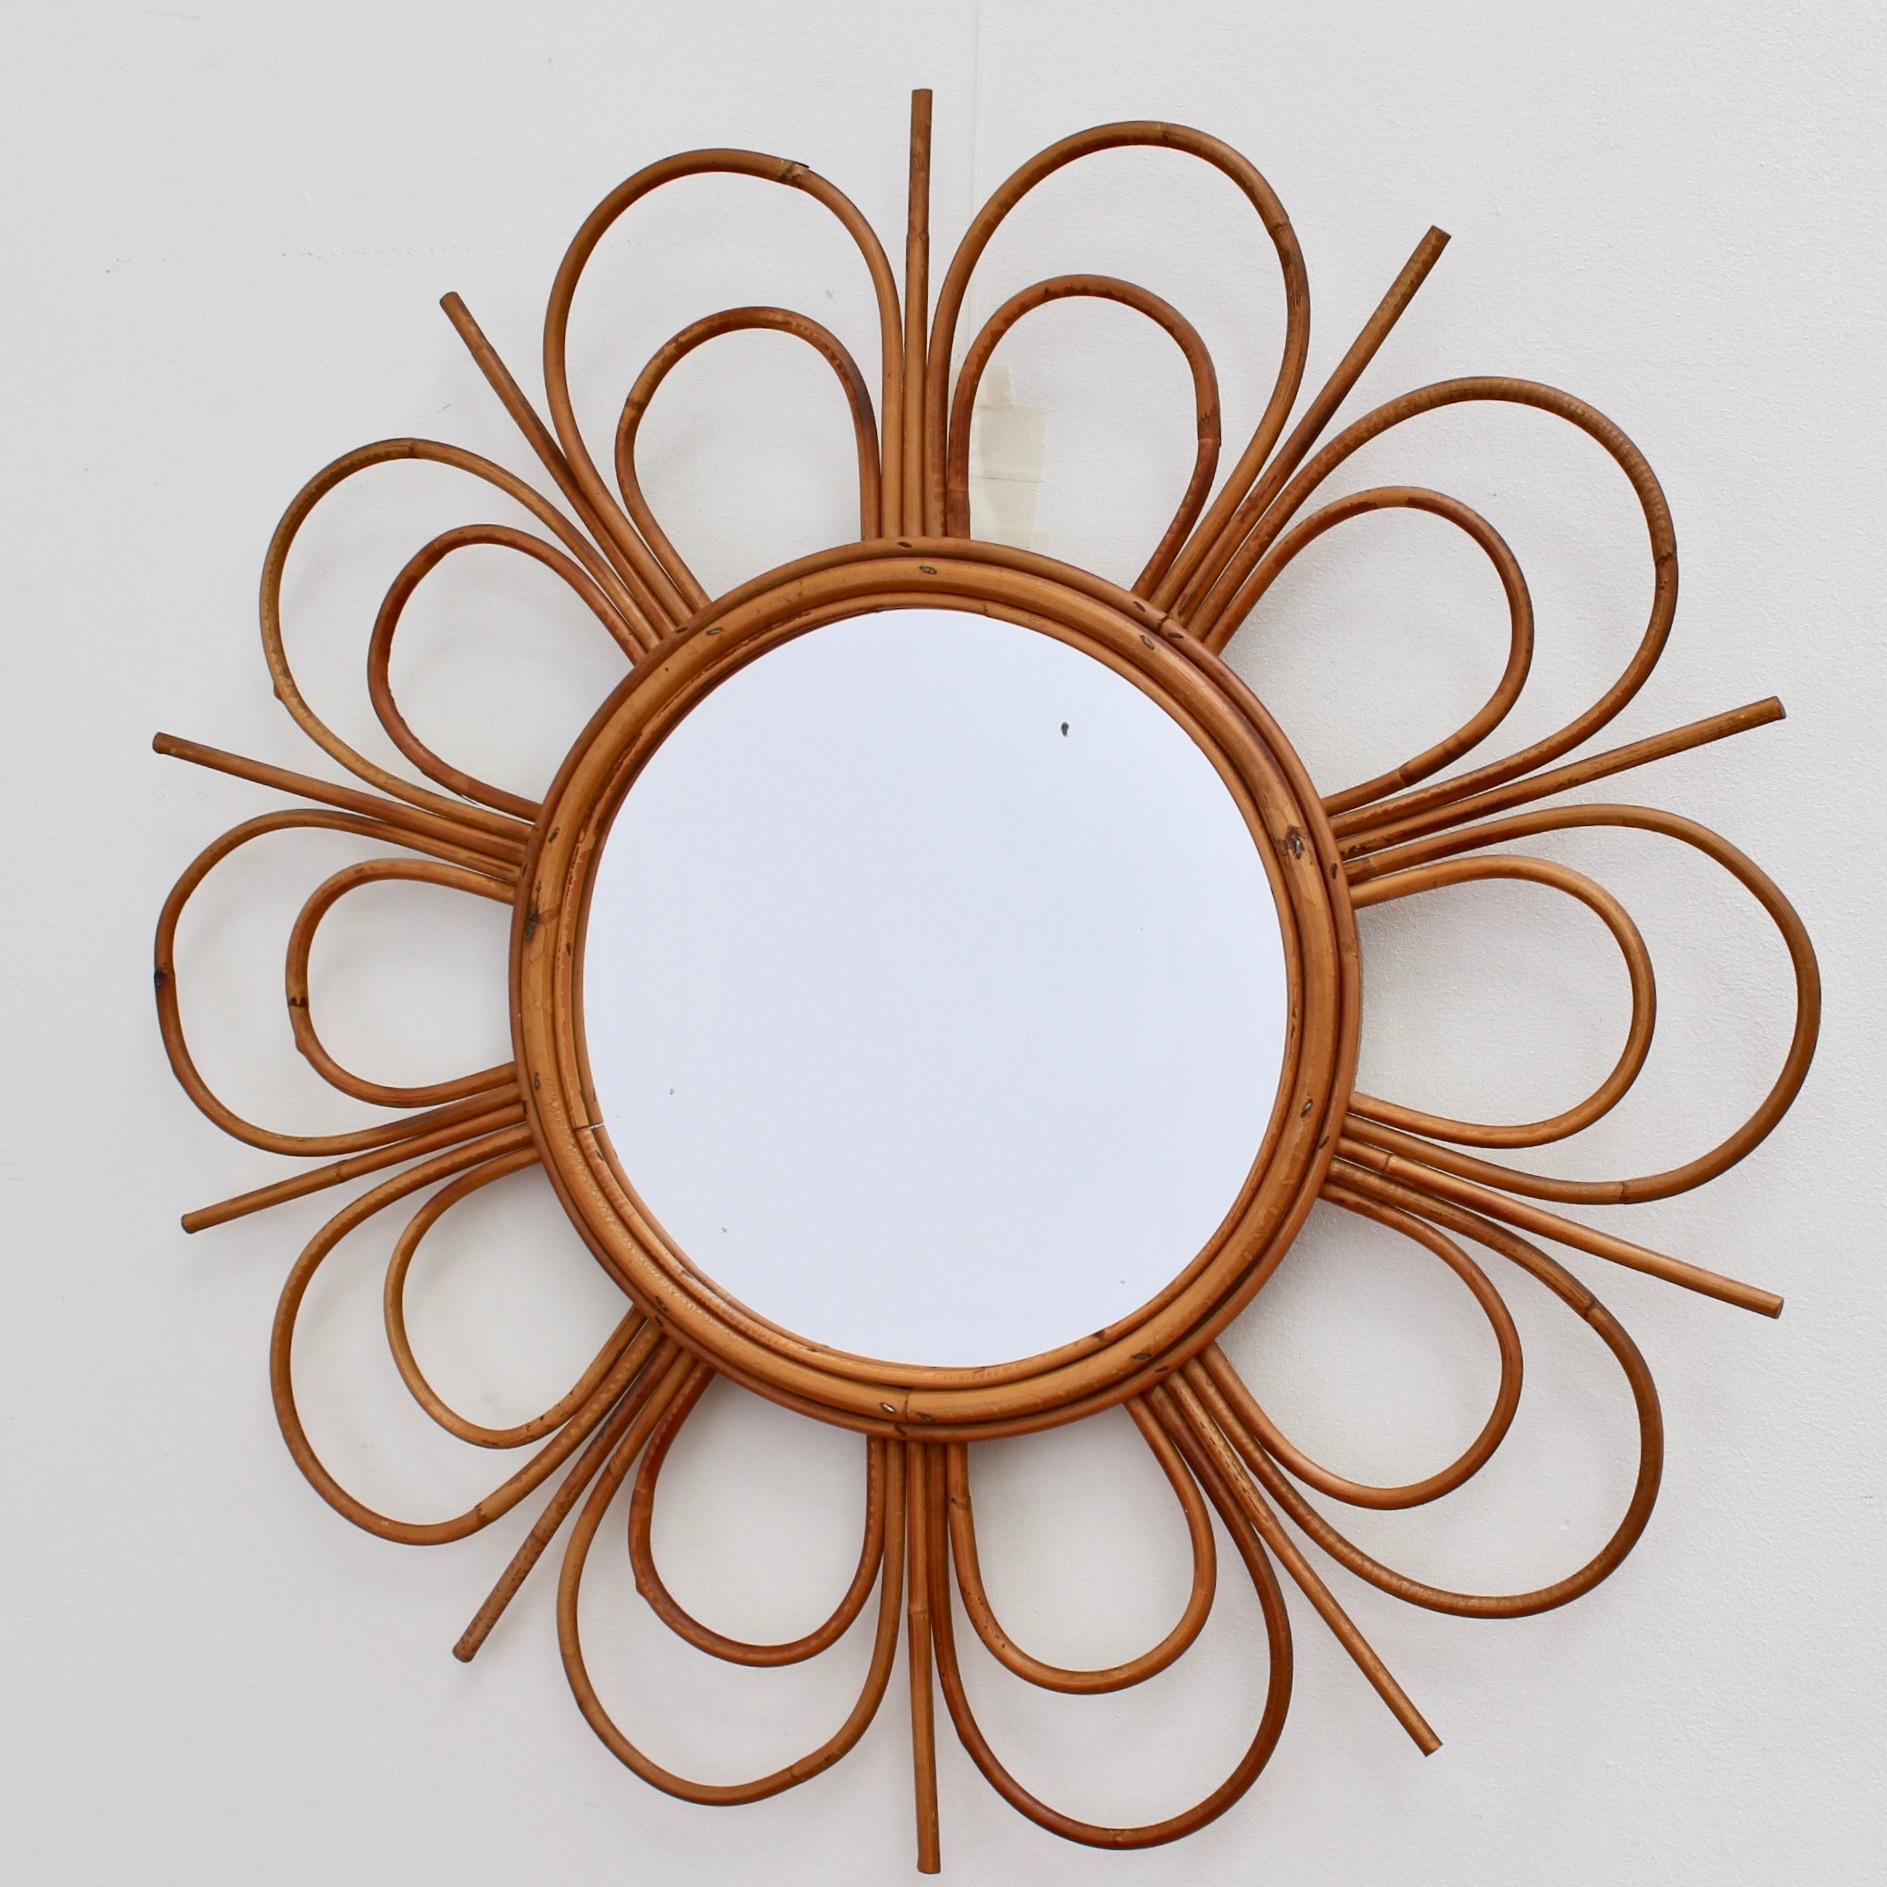 Midcentury French rattan flower-shaped wall mirror, circa 1960s. Very unique, charming, uplifting, stylish and collectible, this mirror is in overall good vintage condition commensurate with its age and usage. There are some evident blemishes on the